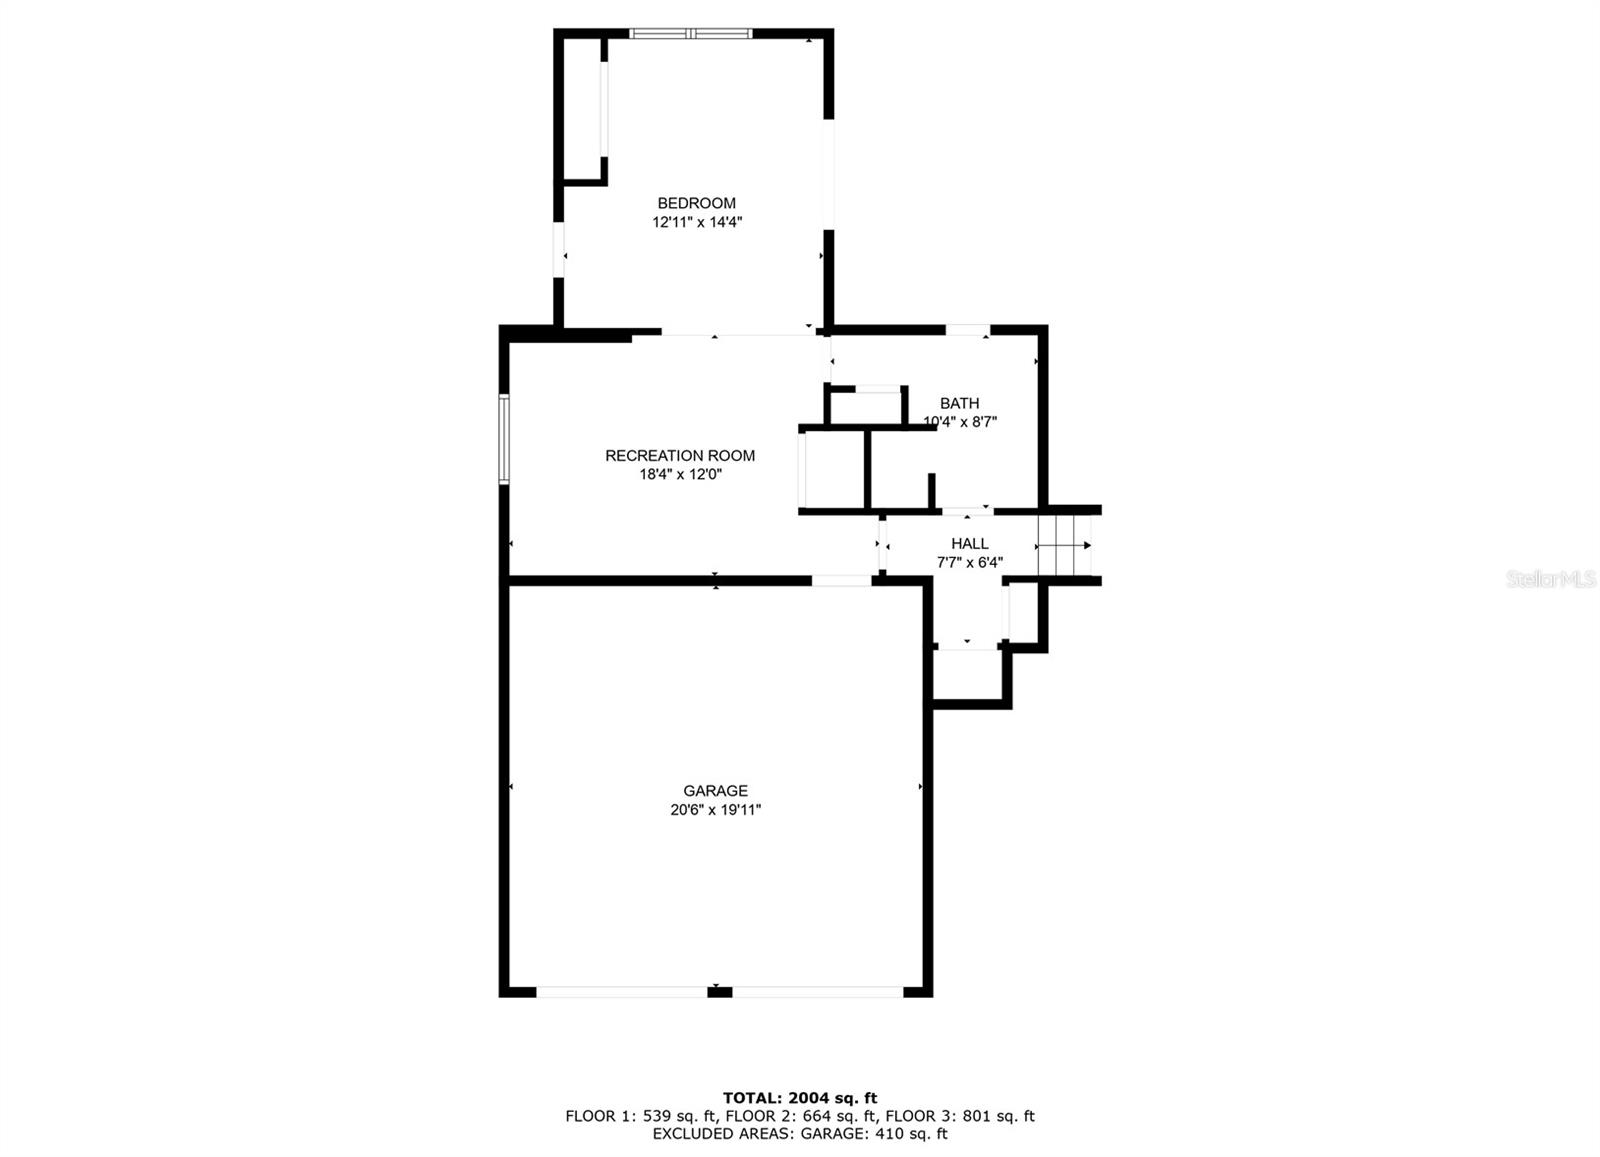 Ground-level floorplan, featuring the in-law suite